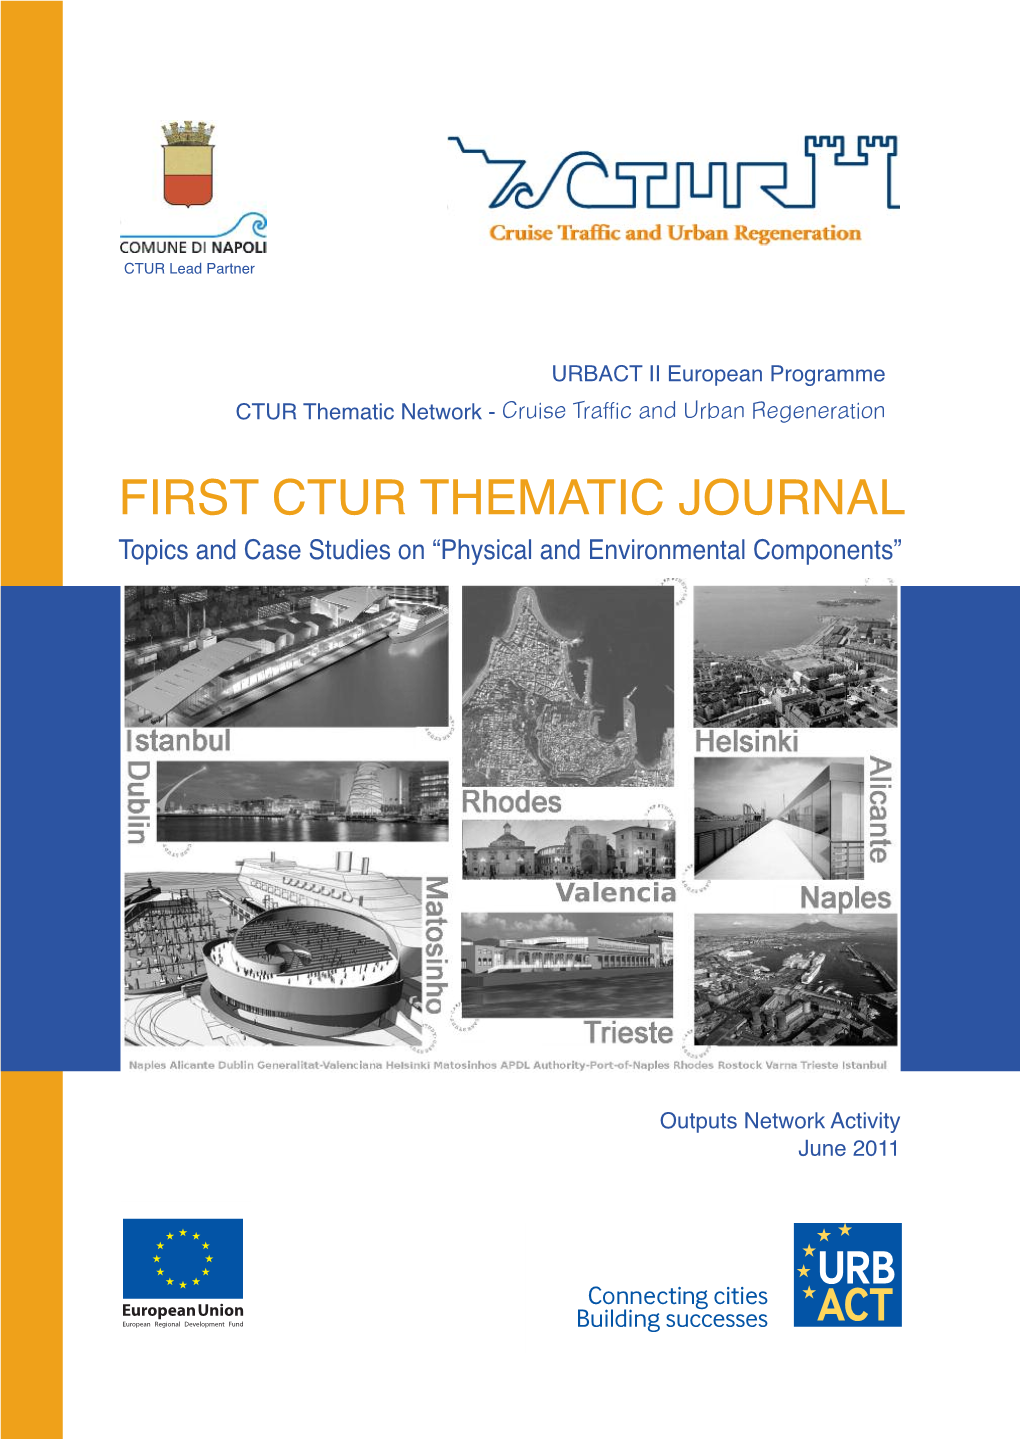 First CTUR Thematic JOURNAL Topics and Case Studies on “Physical and Environmental Components”